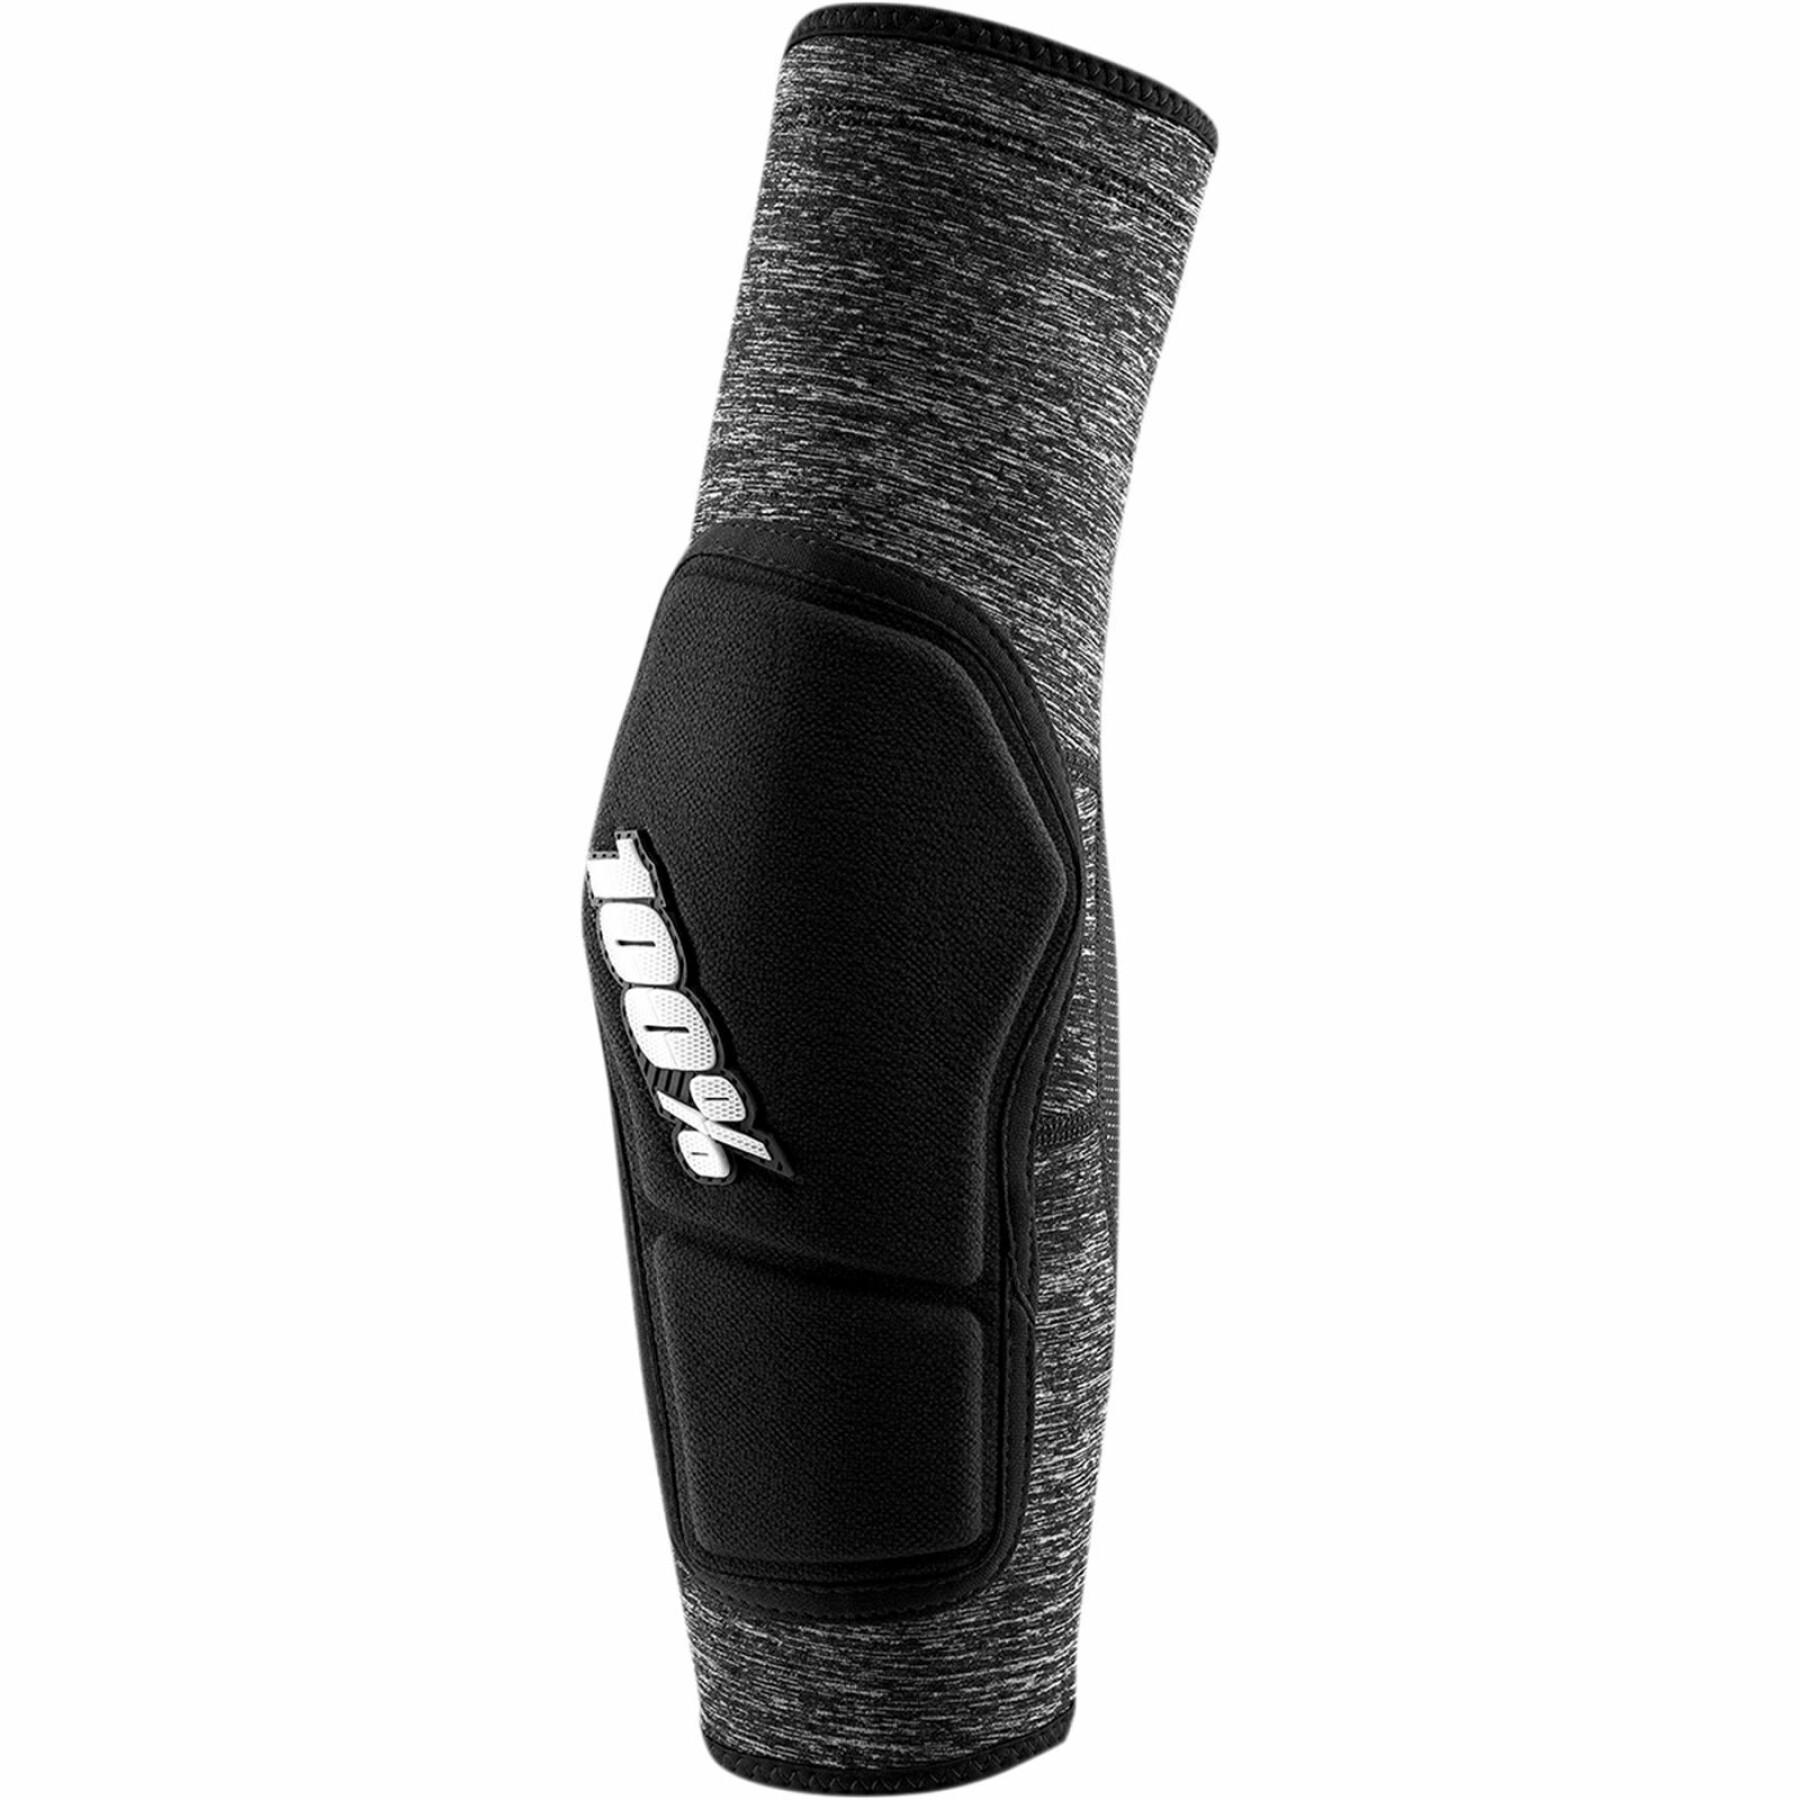 Elbow pads 100% ridecamp